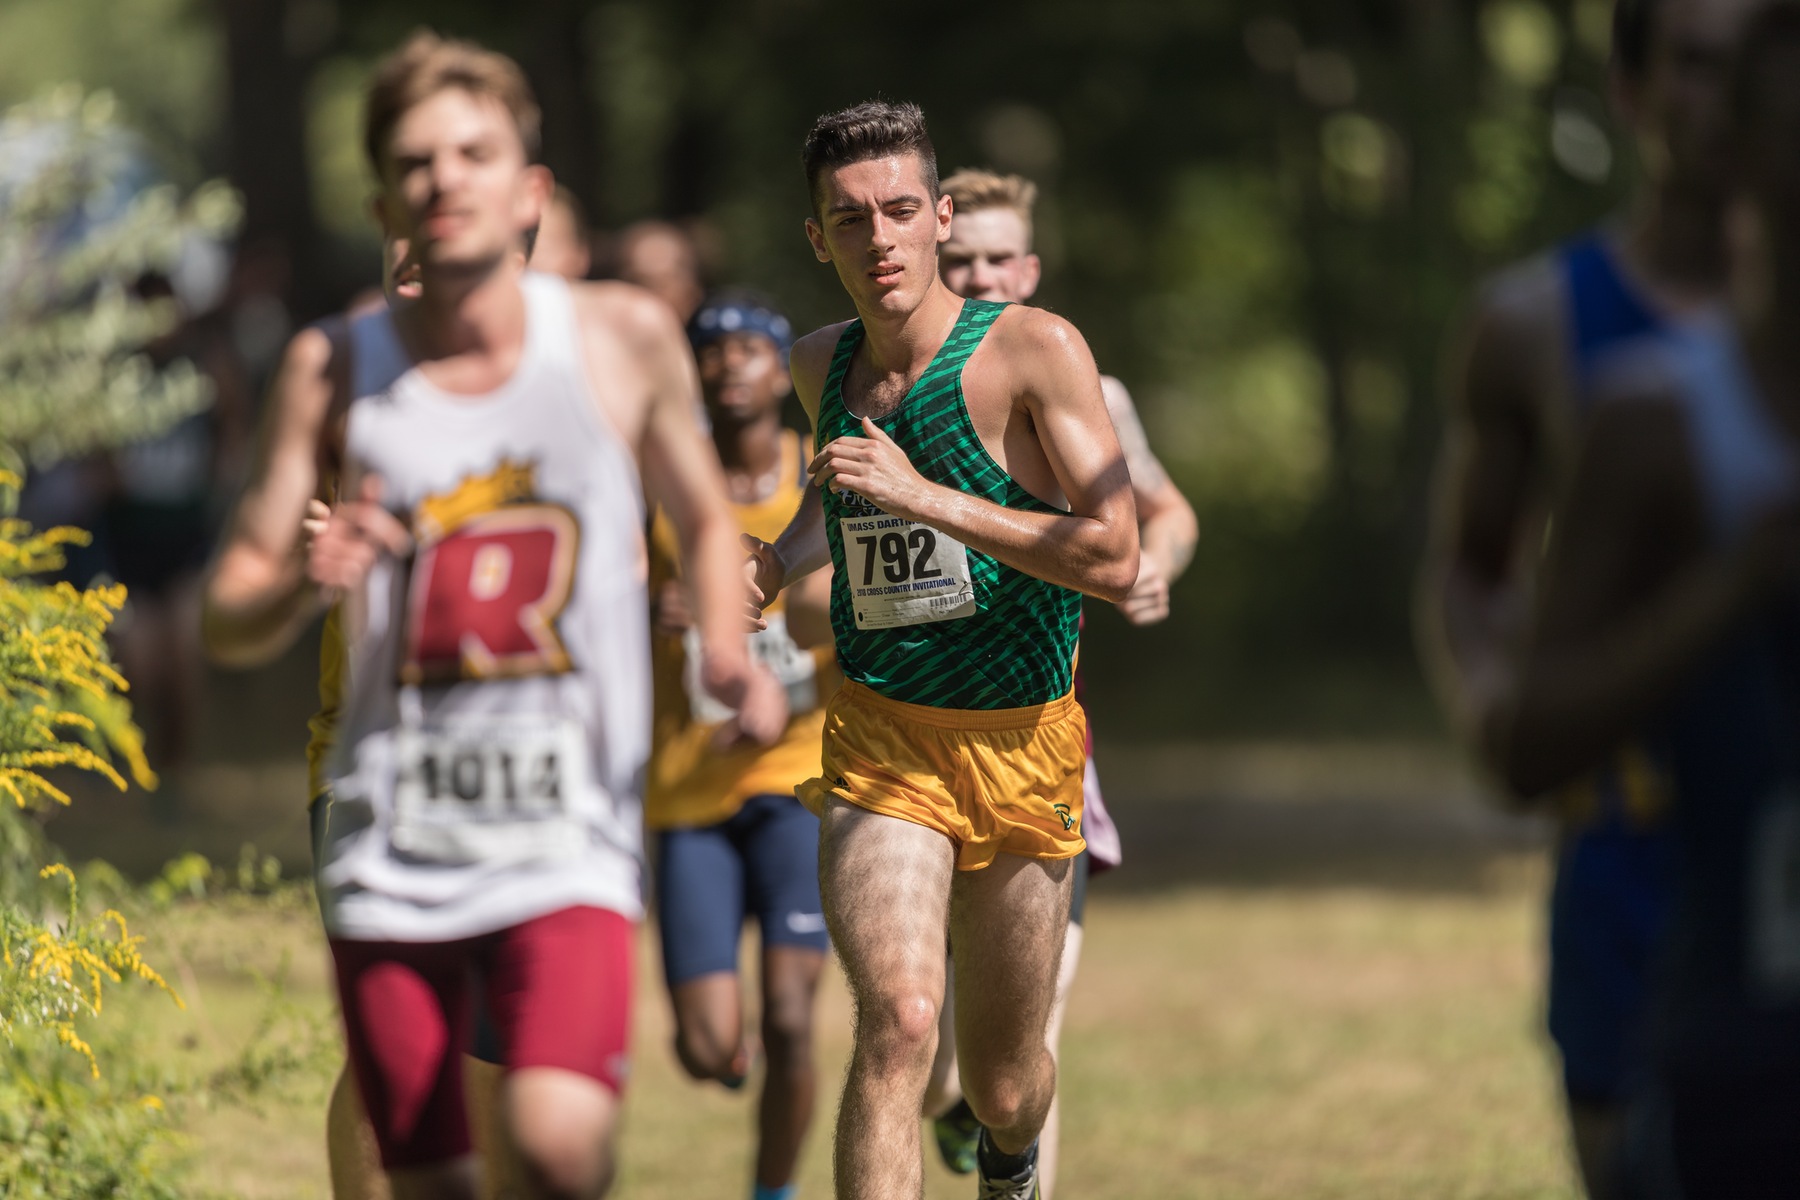 Falcons Compete At All-New England’s & James Early Memorial Invite